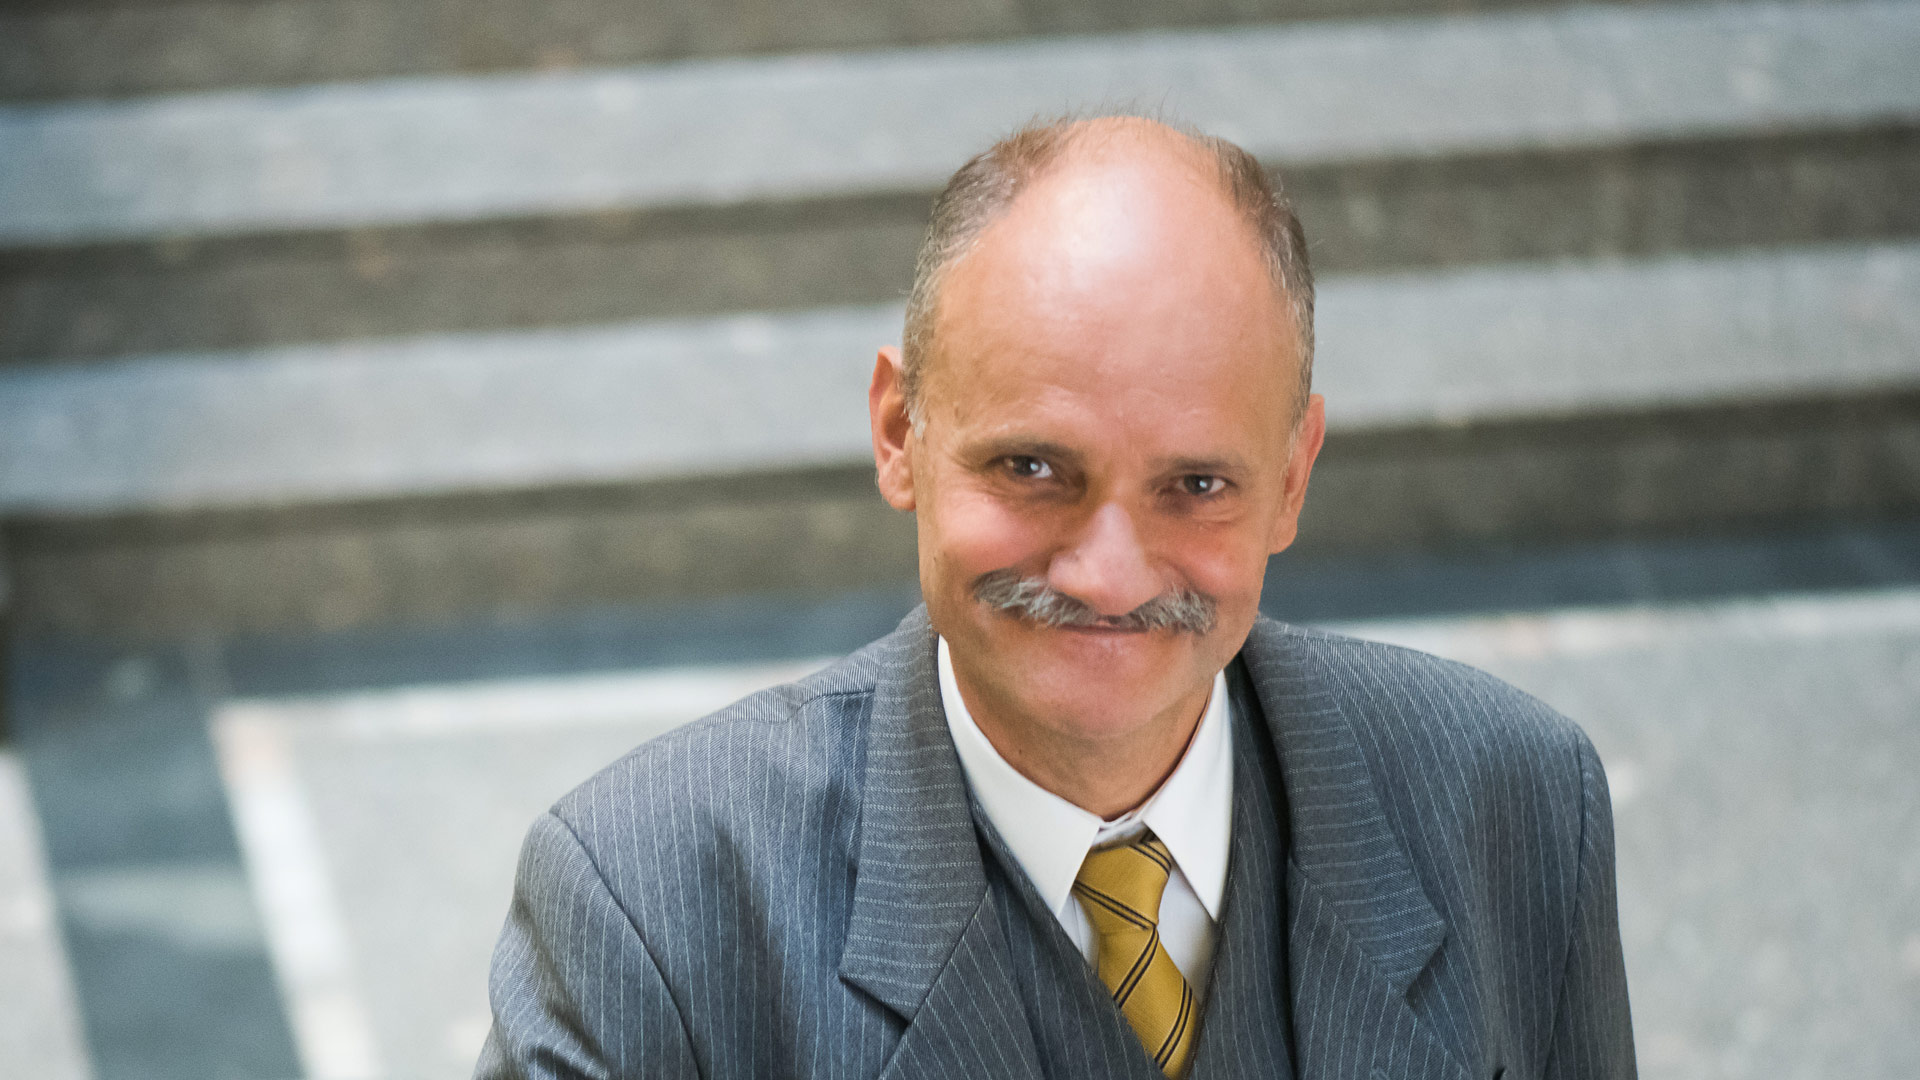 The photo shows the AGH UST Vice-Rector for Education, Professor Wojciech Łużny.